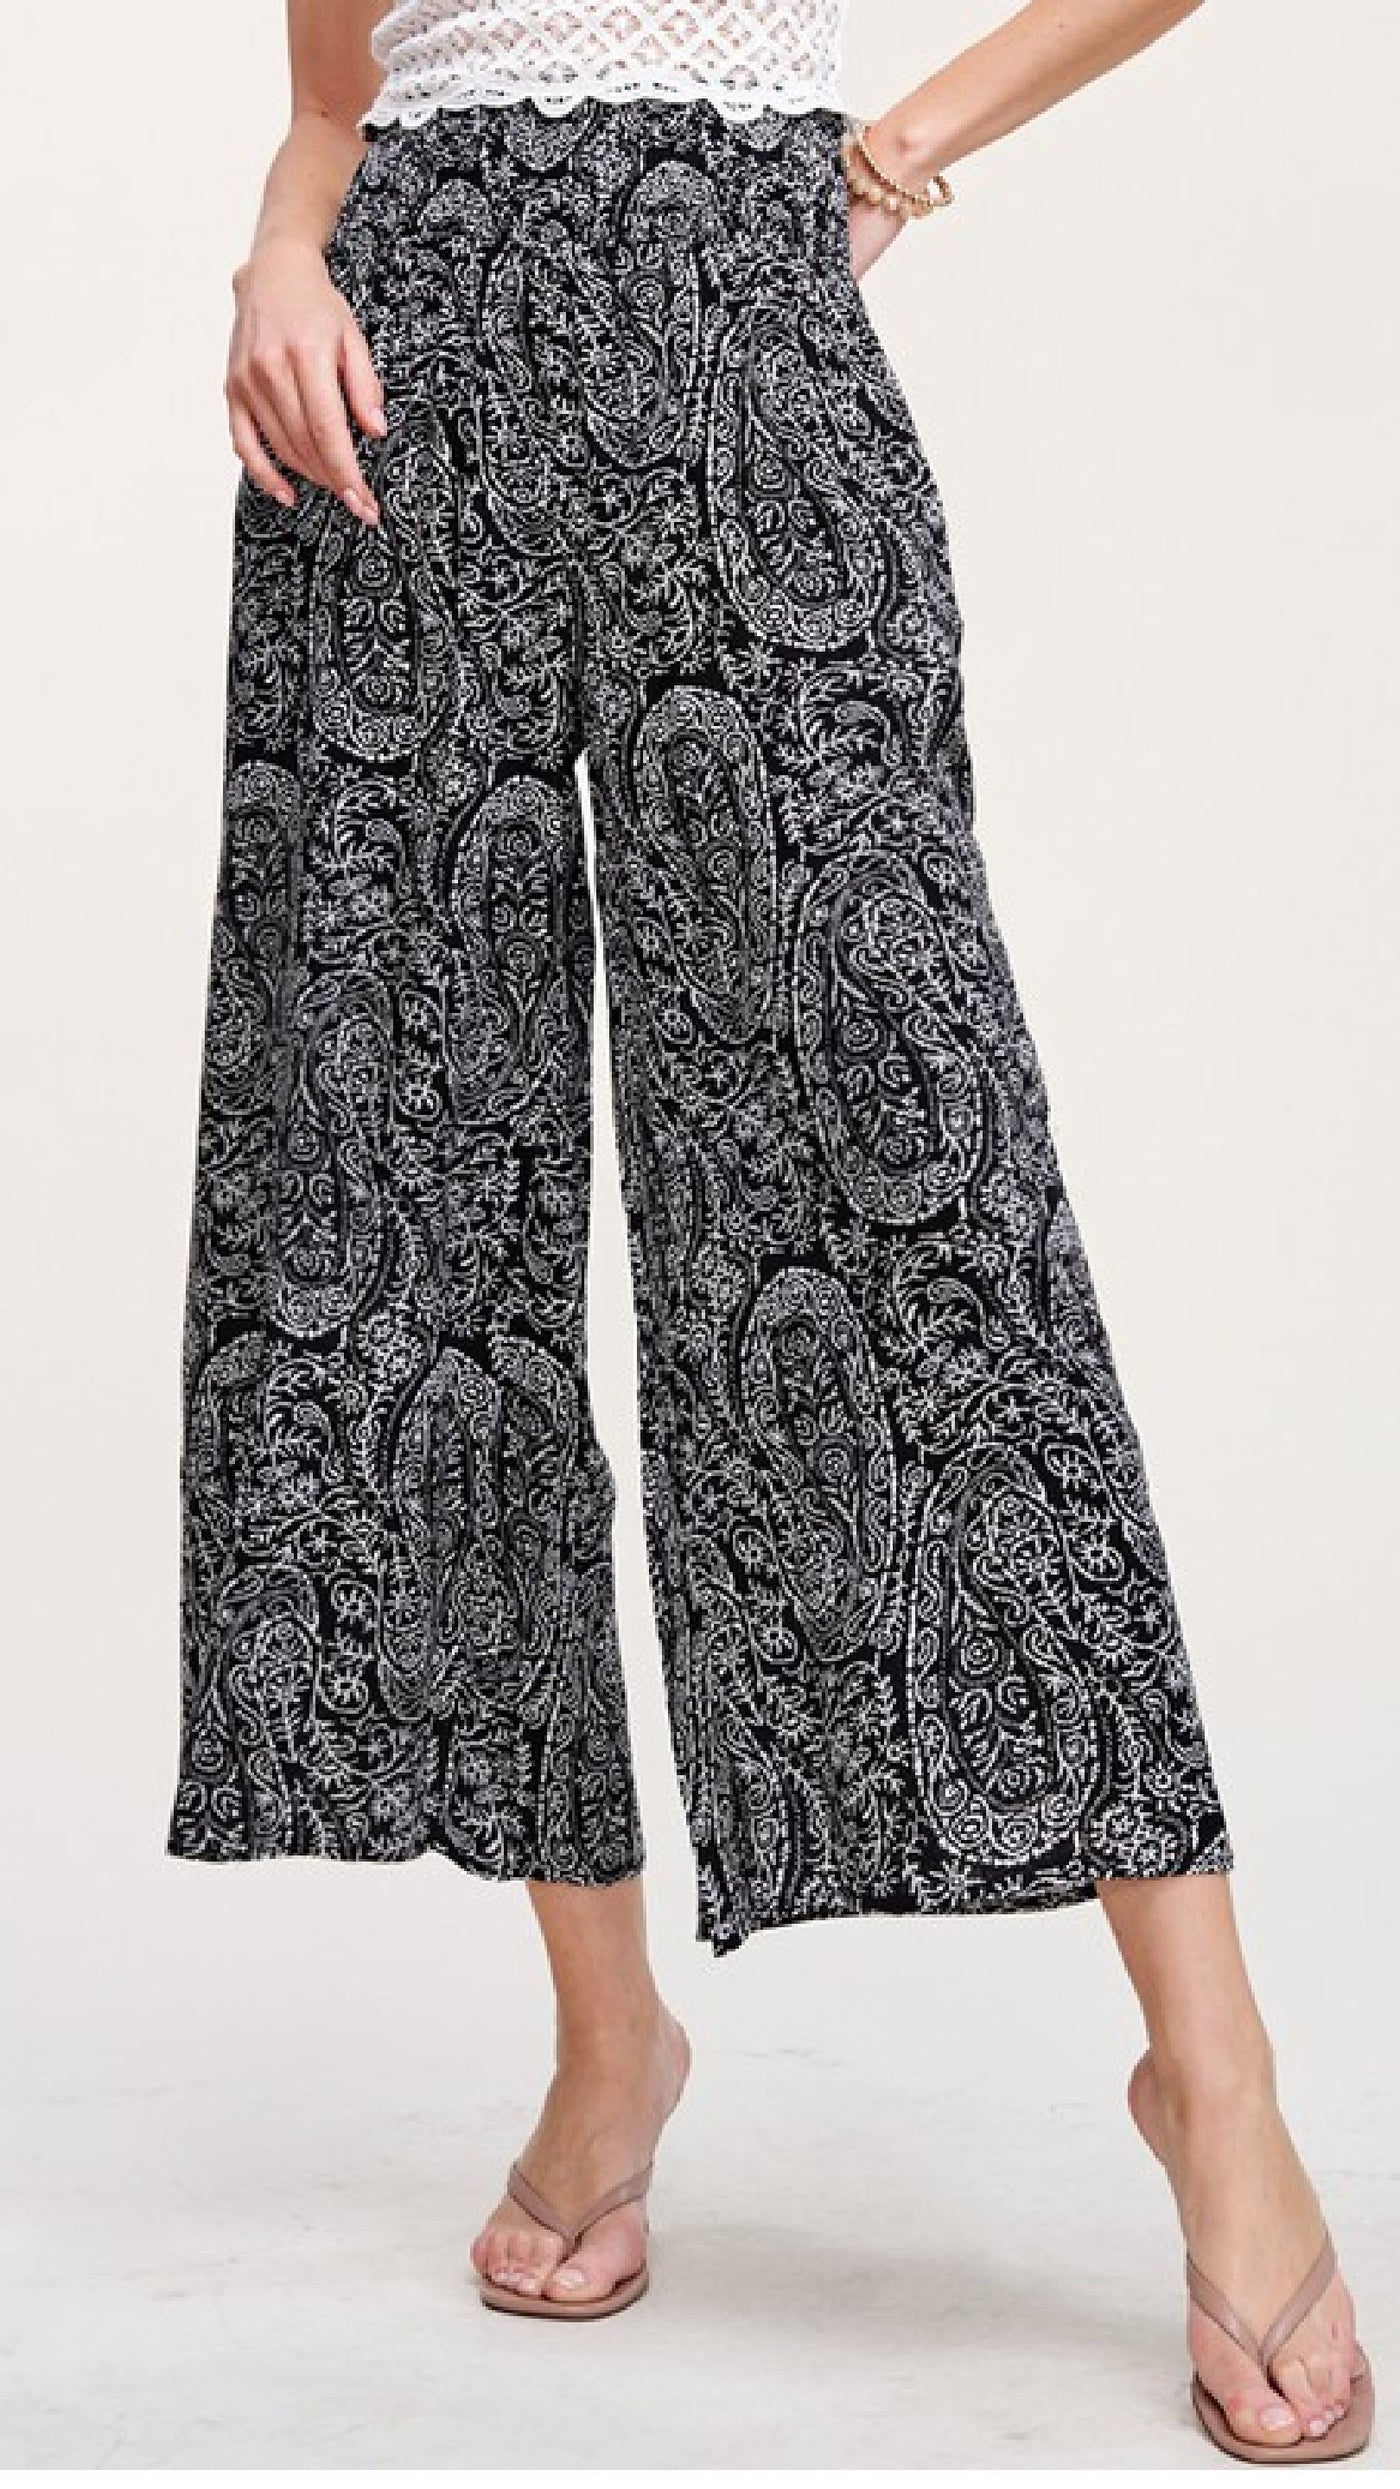 Paisley Print Pants - Piper and Hollow Boutique